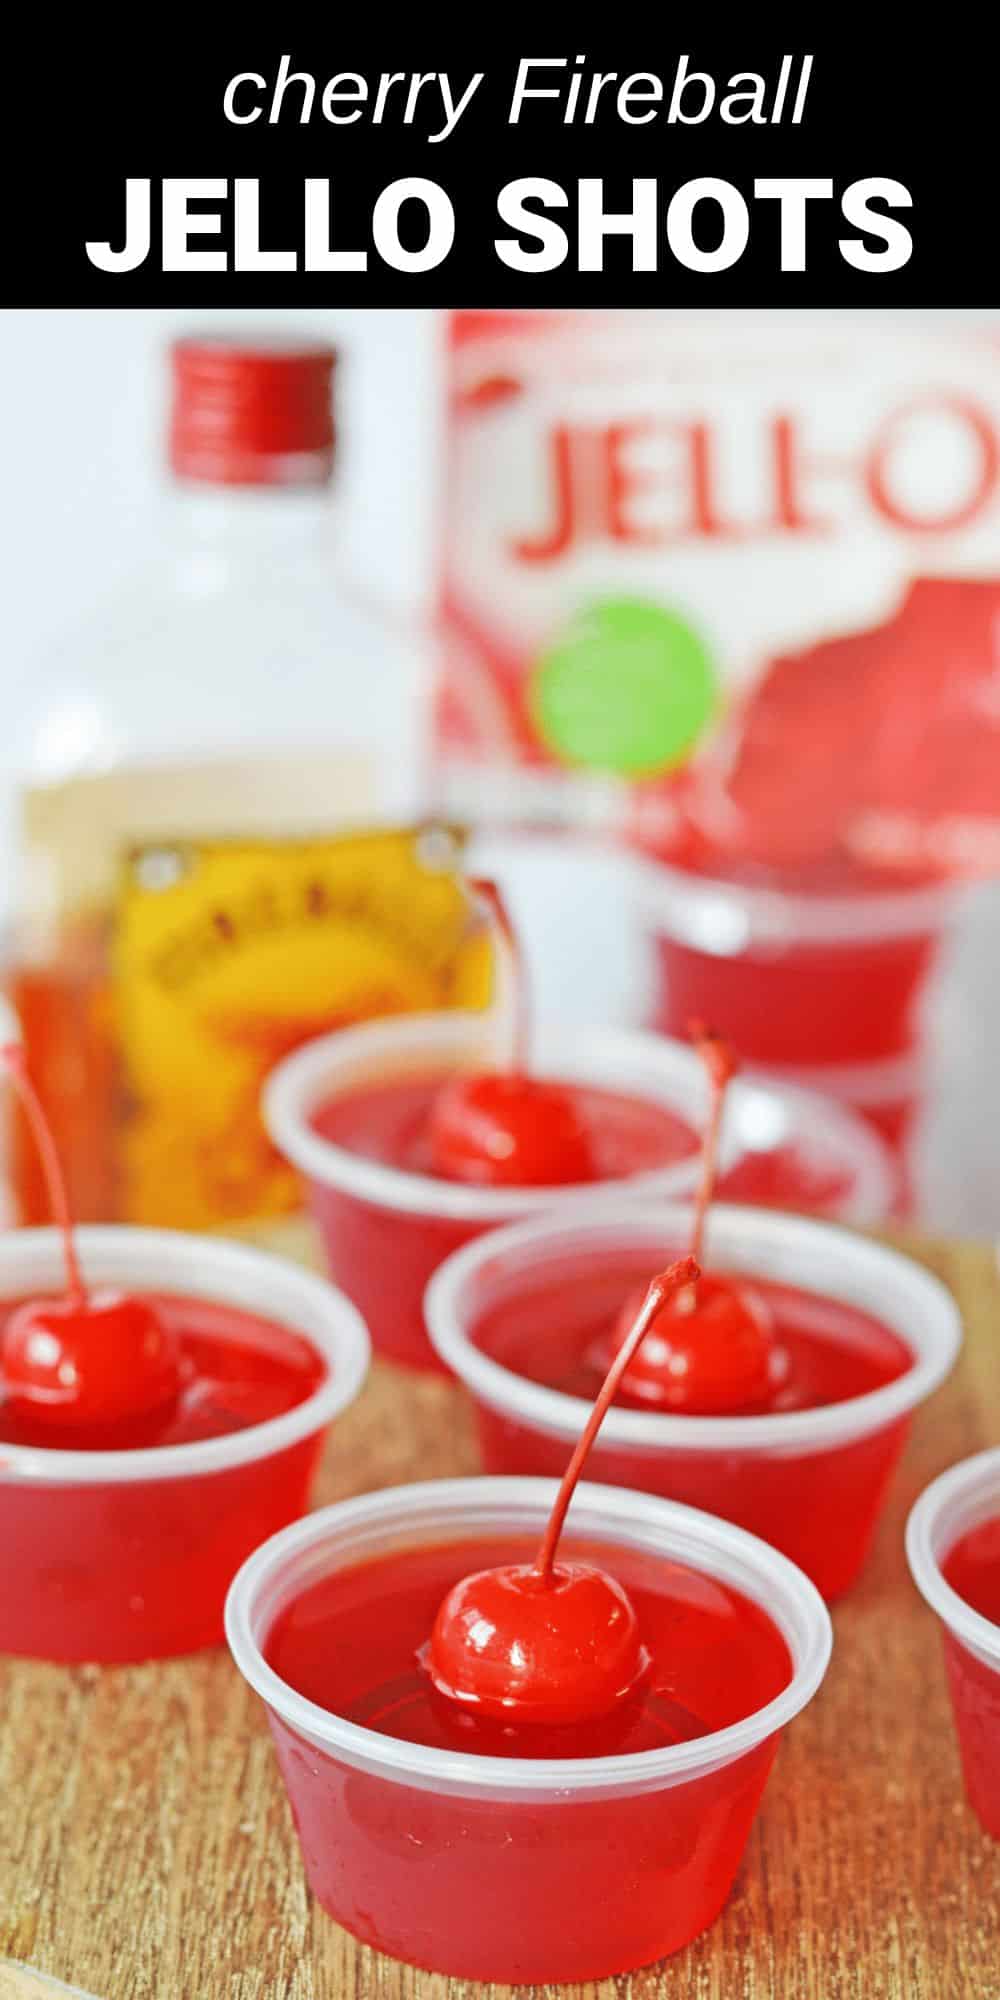 These fireball Jello shots are the perfect way to add some boozy fun to your next gathering. Cherry Jello and Fireball cinnamon whisky combine for a sweet and spicy treat that all your guests will love. With their vibrant red color and fun maraschino cherry garnish, they’re an eye-catching treat that’s sure to get plenty of attention.